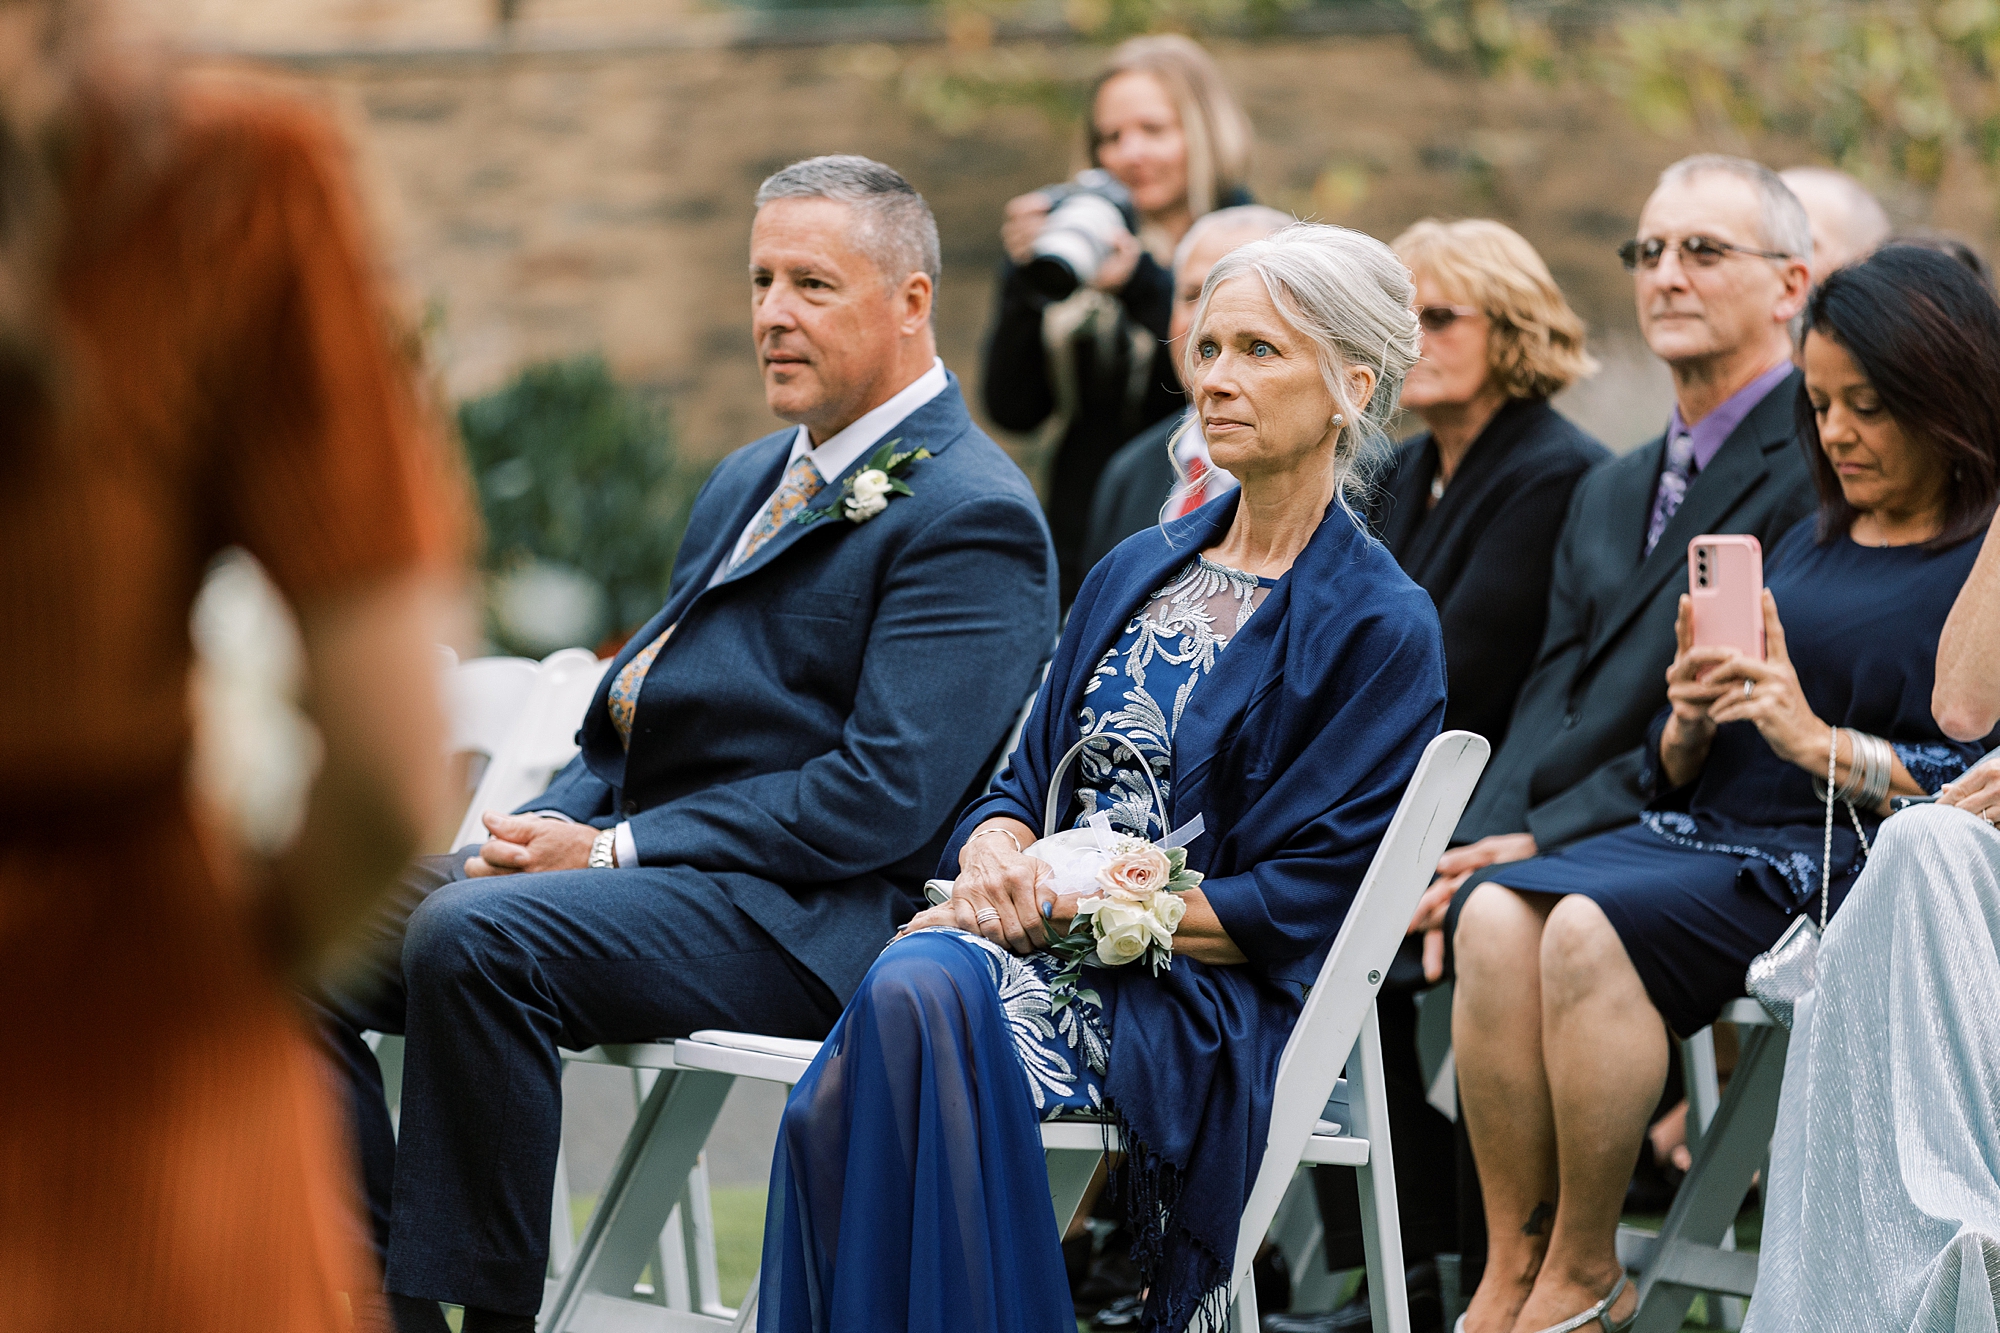 parents watch wedding ceremony on lawn